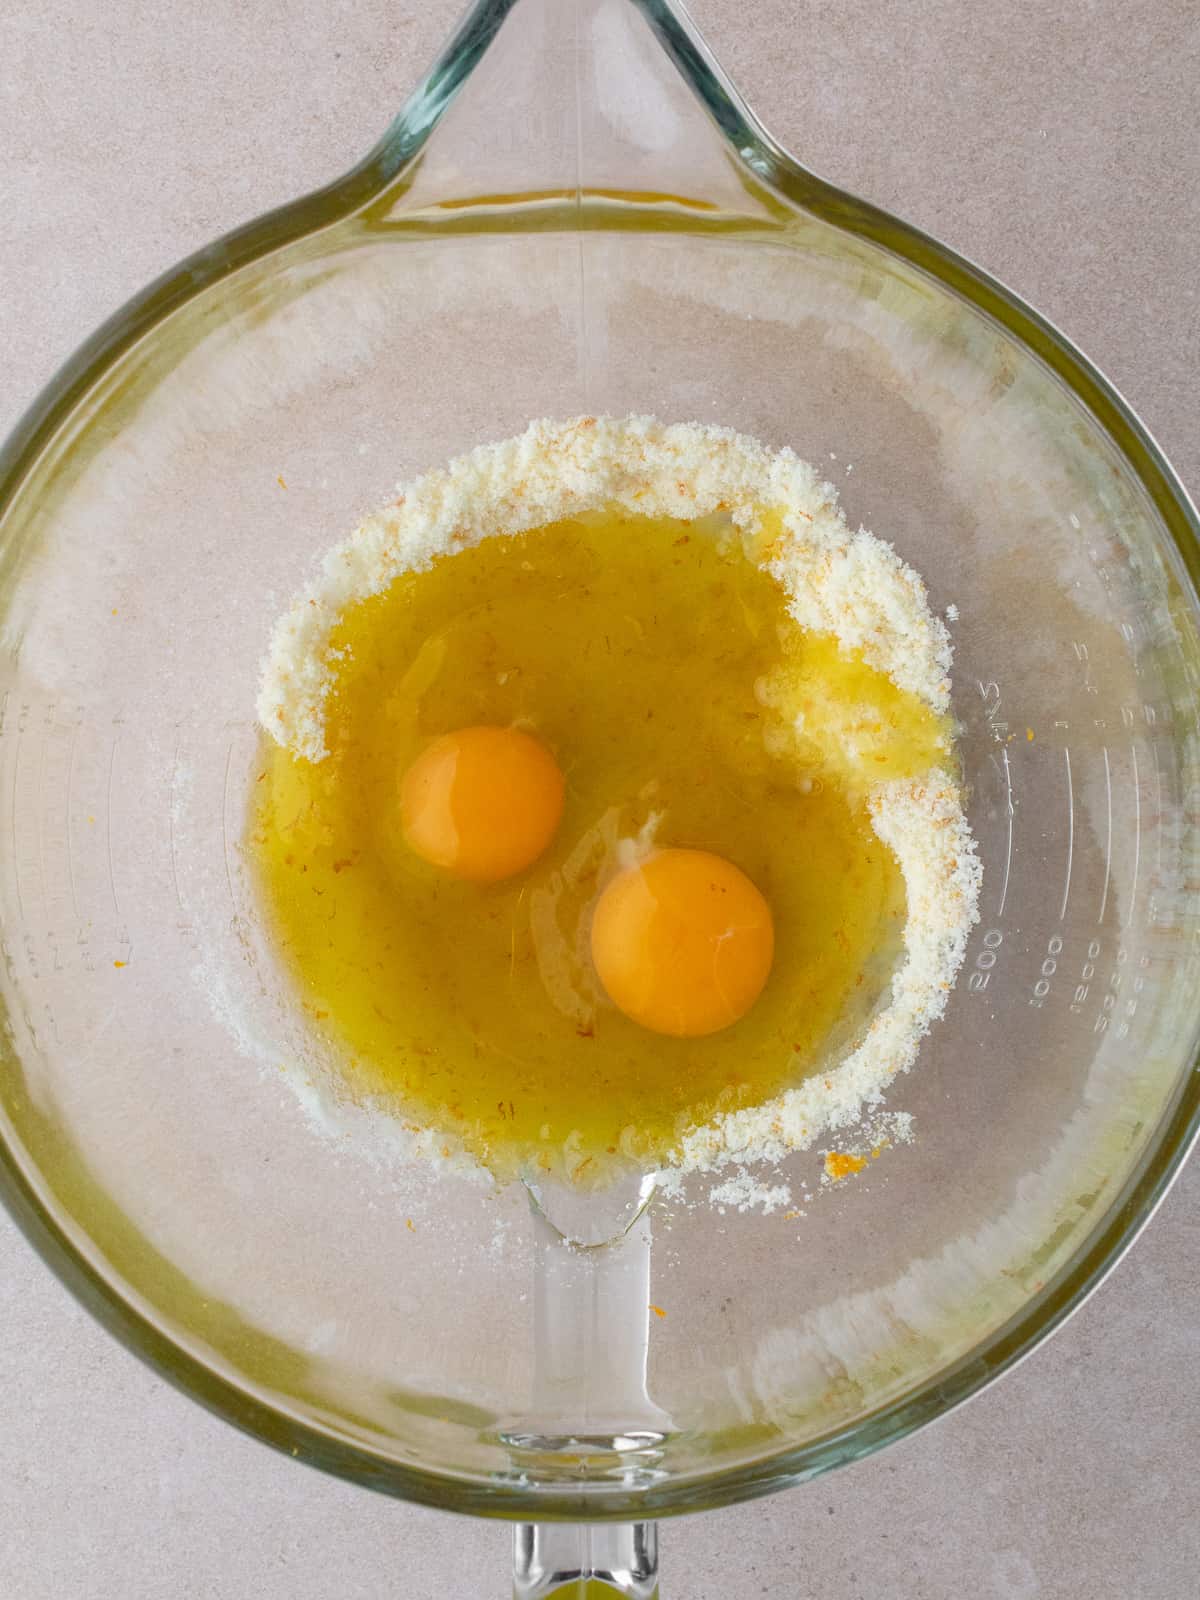 Two large eggs are added to a large bowl of sugar and orange zest.